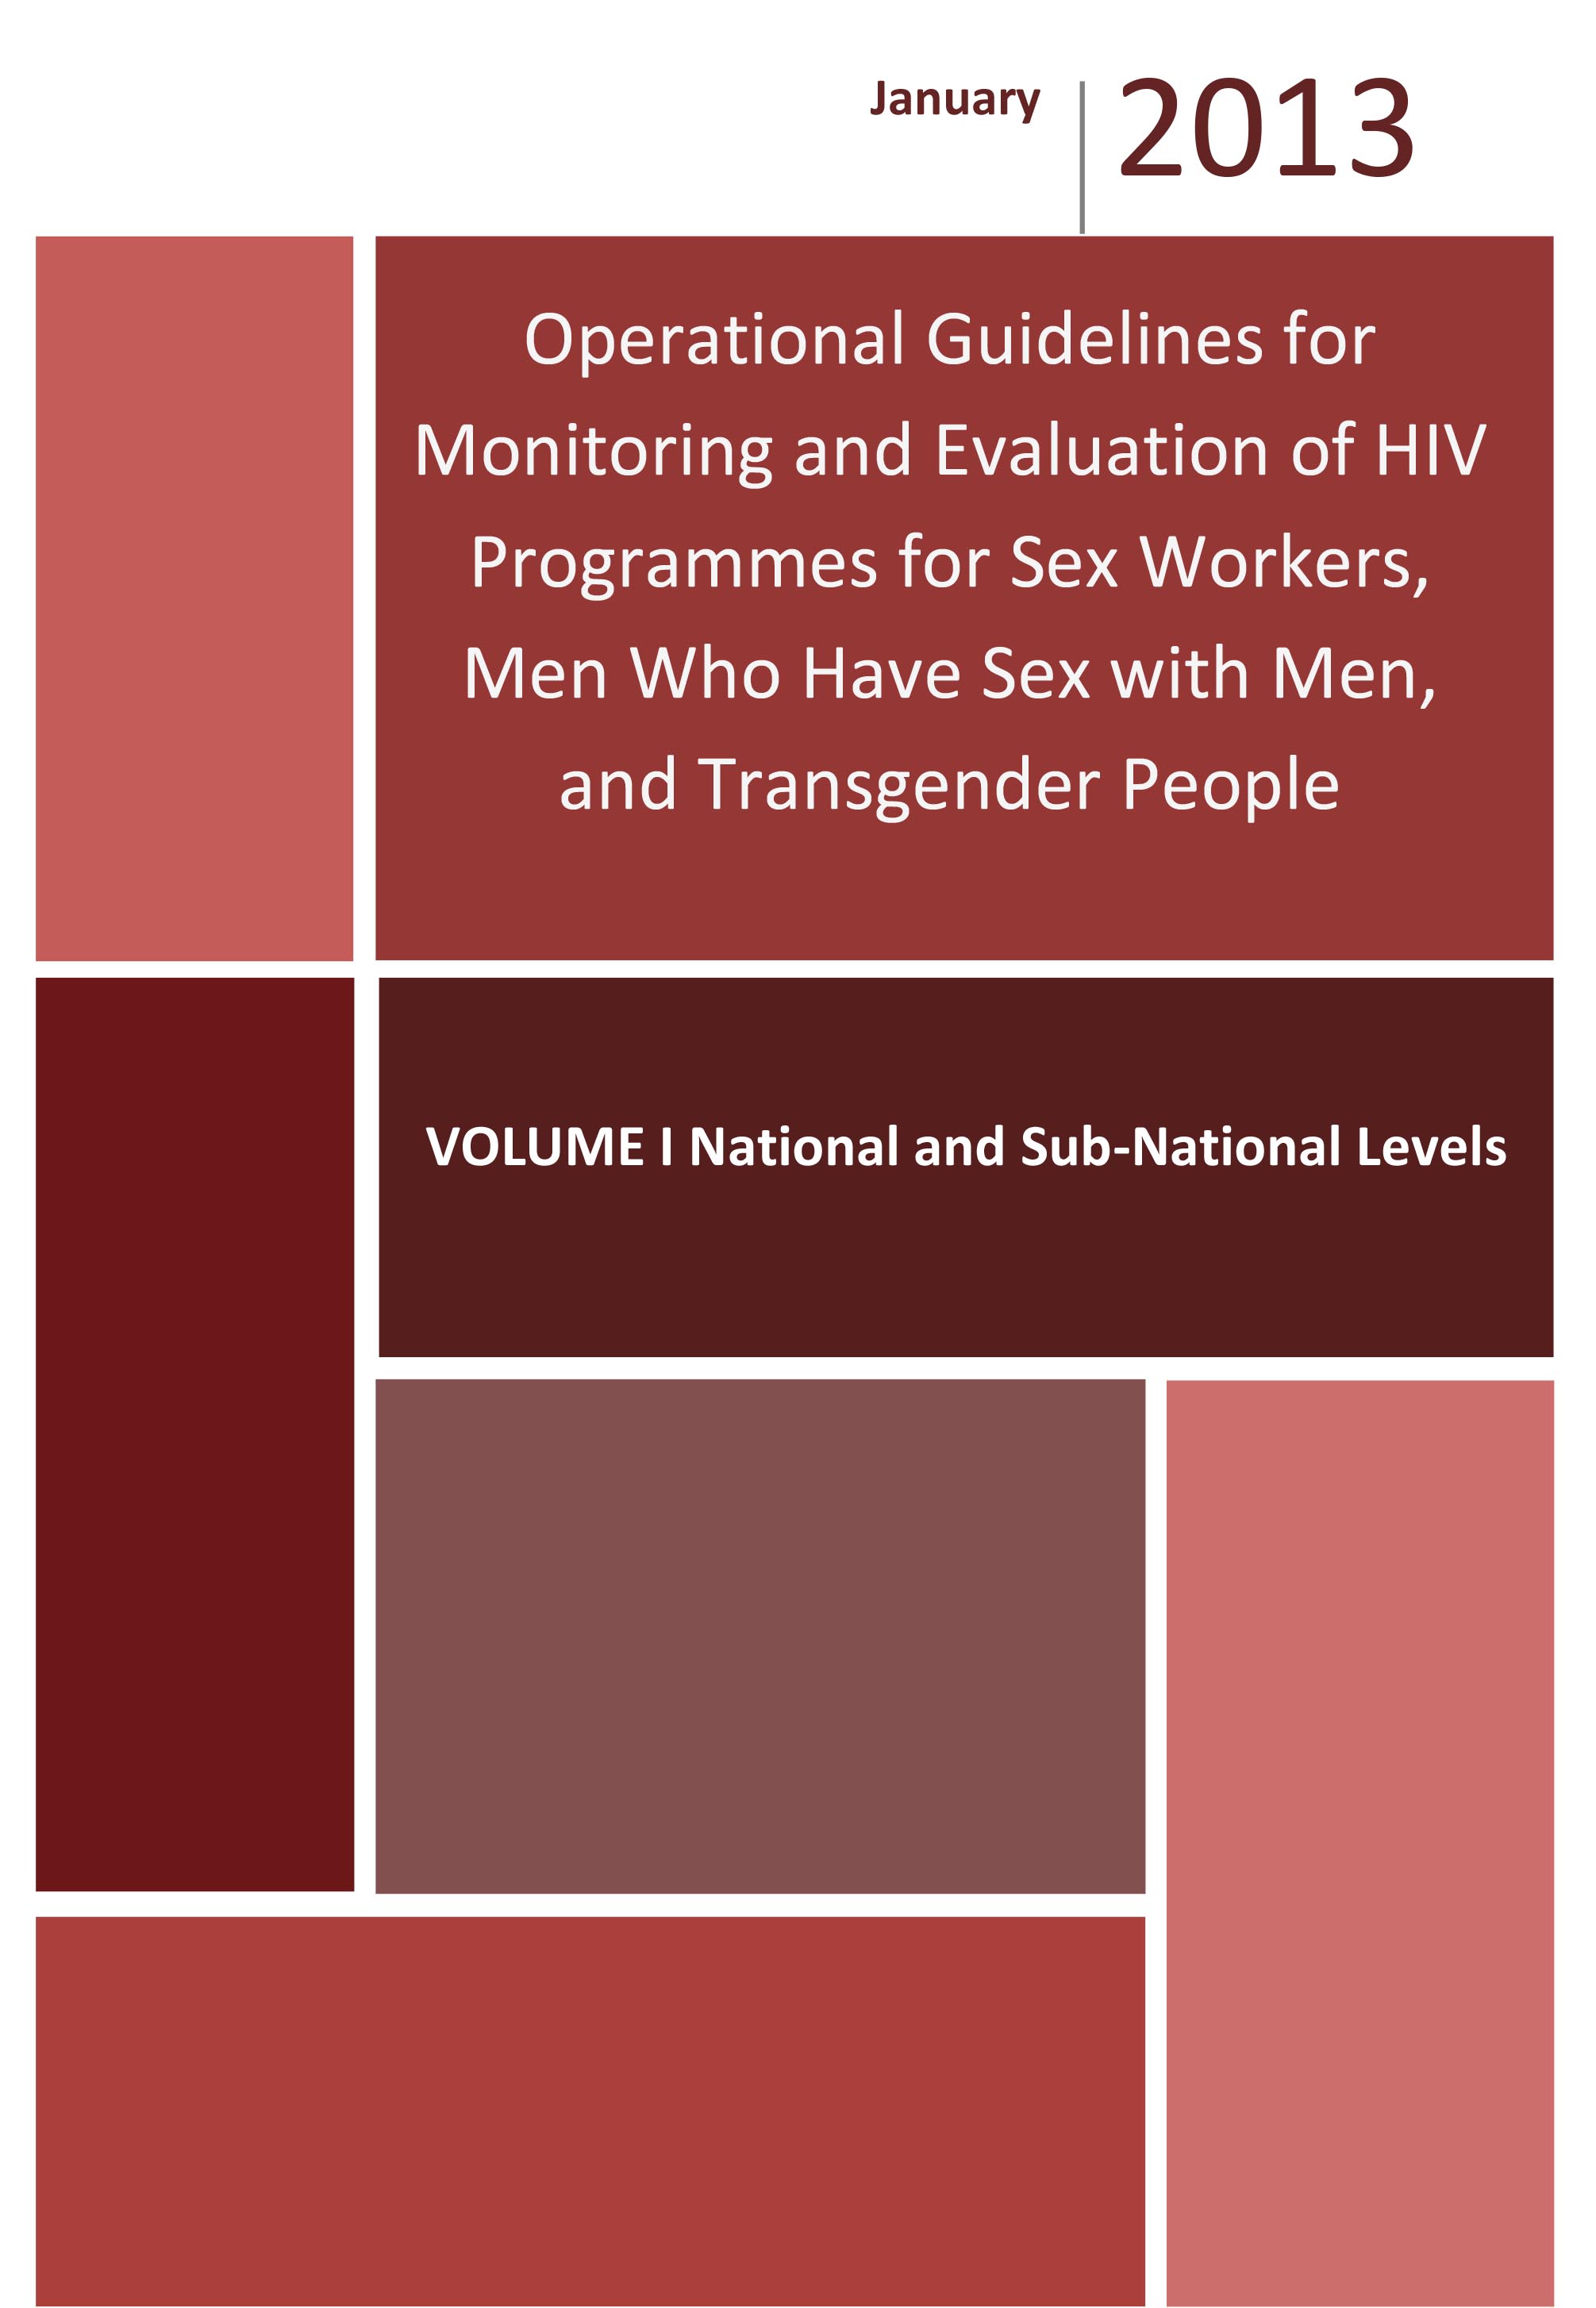 Operational Guidelines for Monitoring and Evaluation of HIV Programmes for Sex Workers